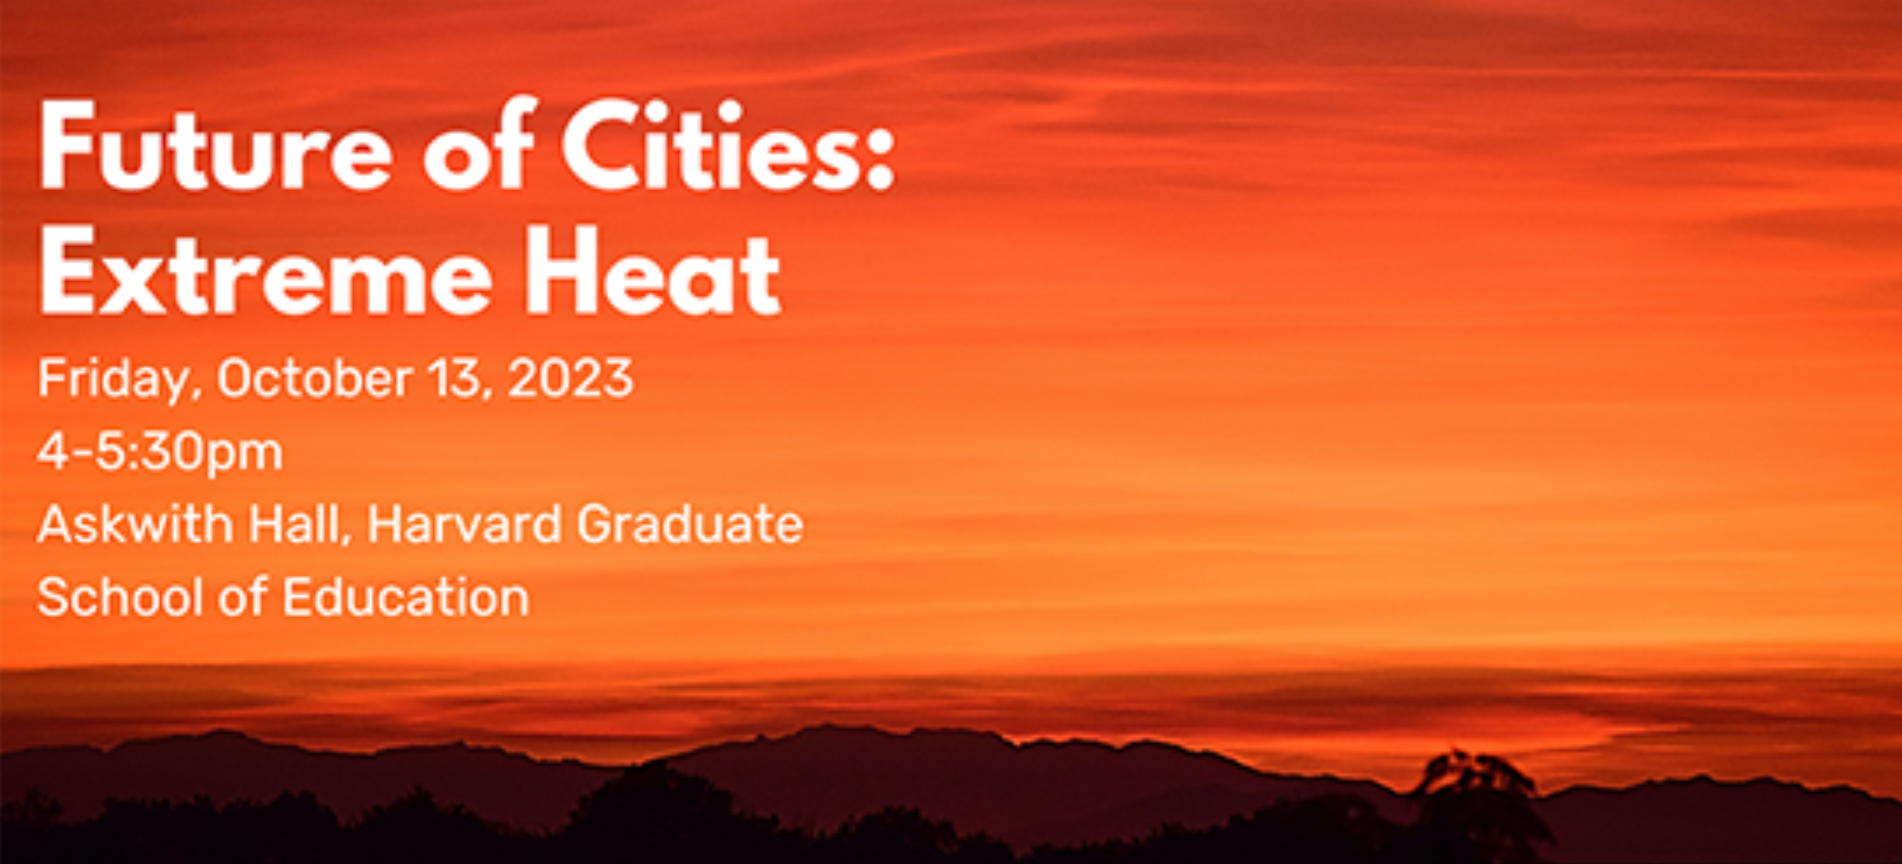 Future of Cities: Extreme Heat event graphic for Oct. 13, 4-5:30 pm.